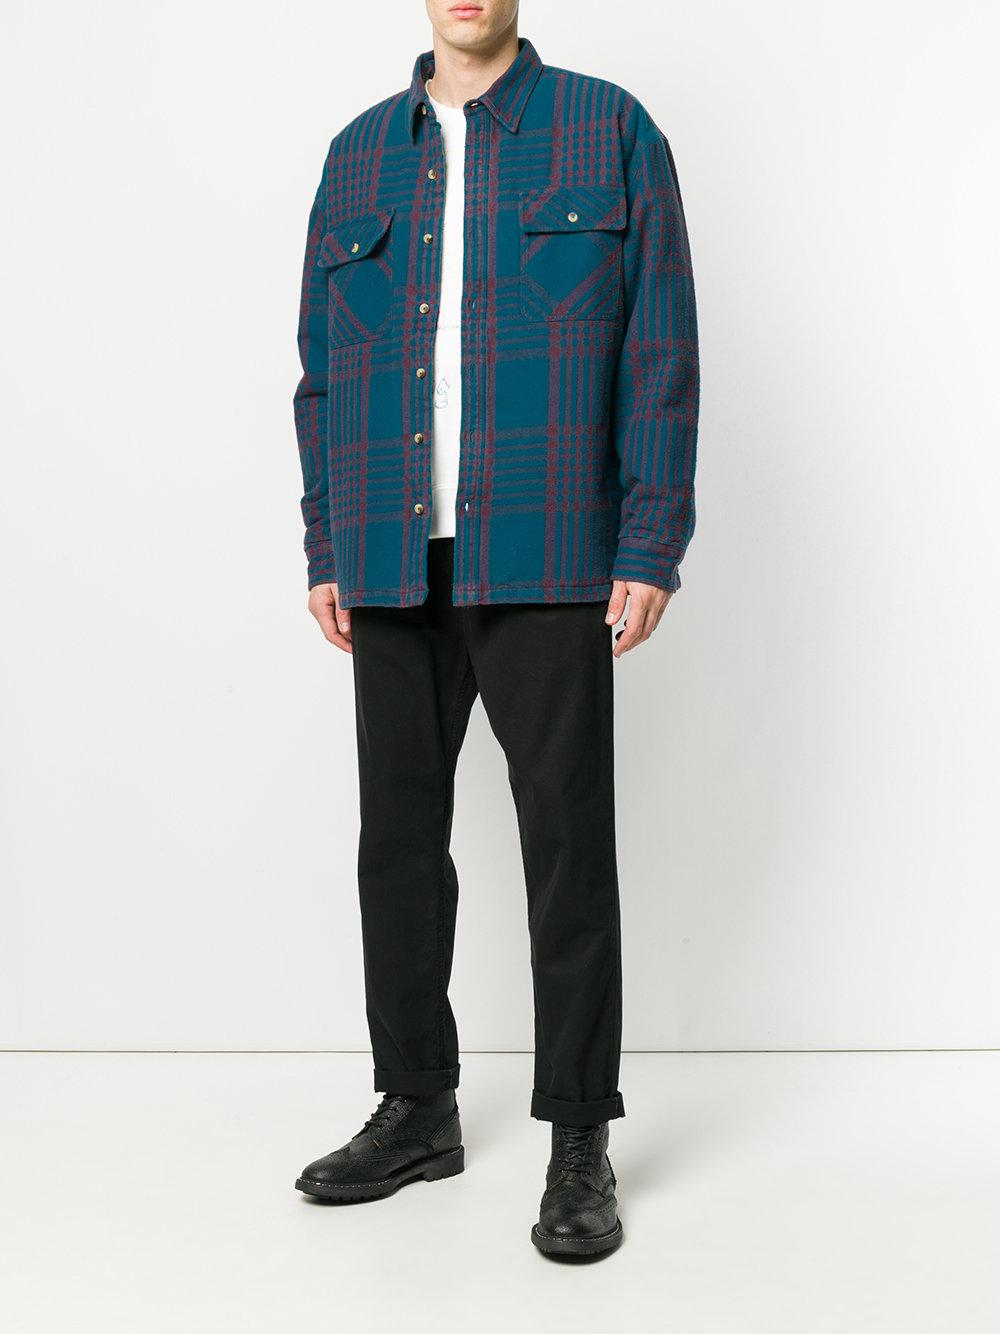 Yeezy Season 5 Padded Cotton-flannel Shirt in Combo 2 (Blue) for Men - Lyst